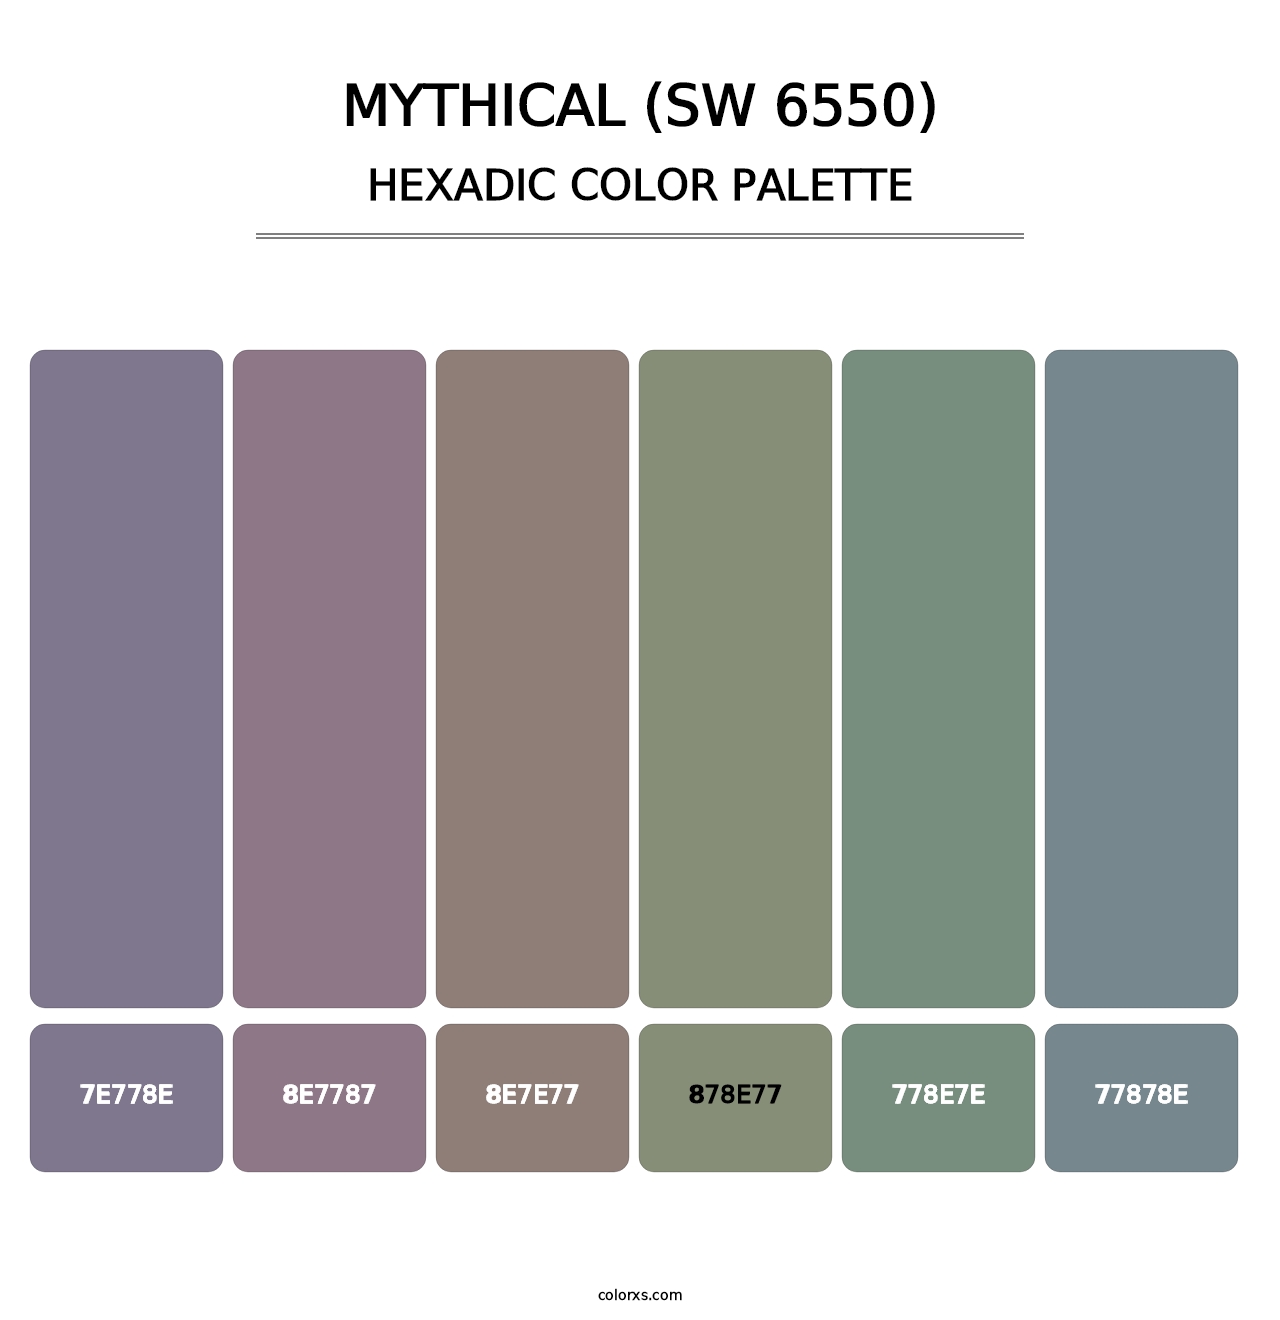 Mythical (SW 6550) - Hexadic Color Palette